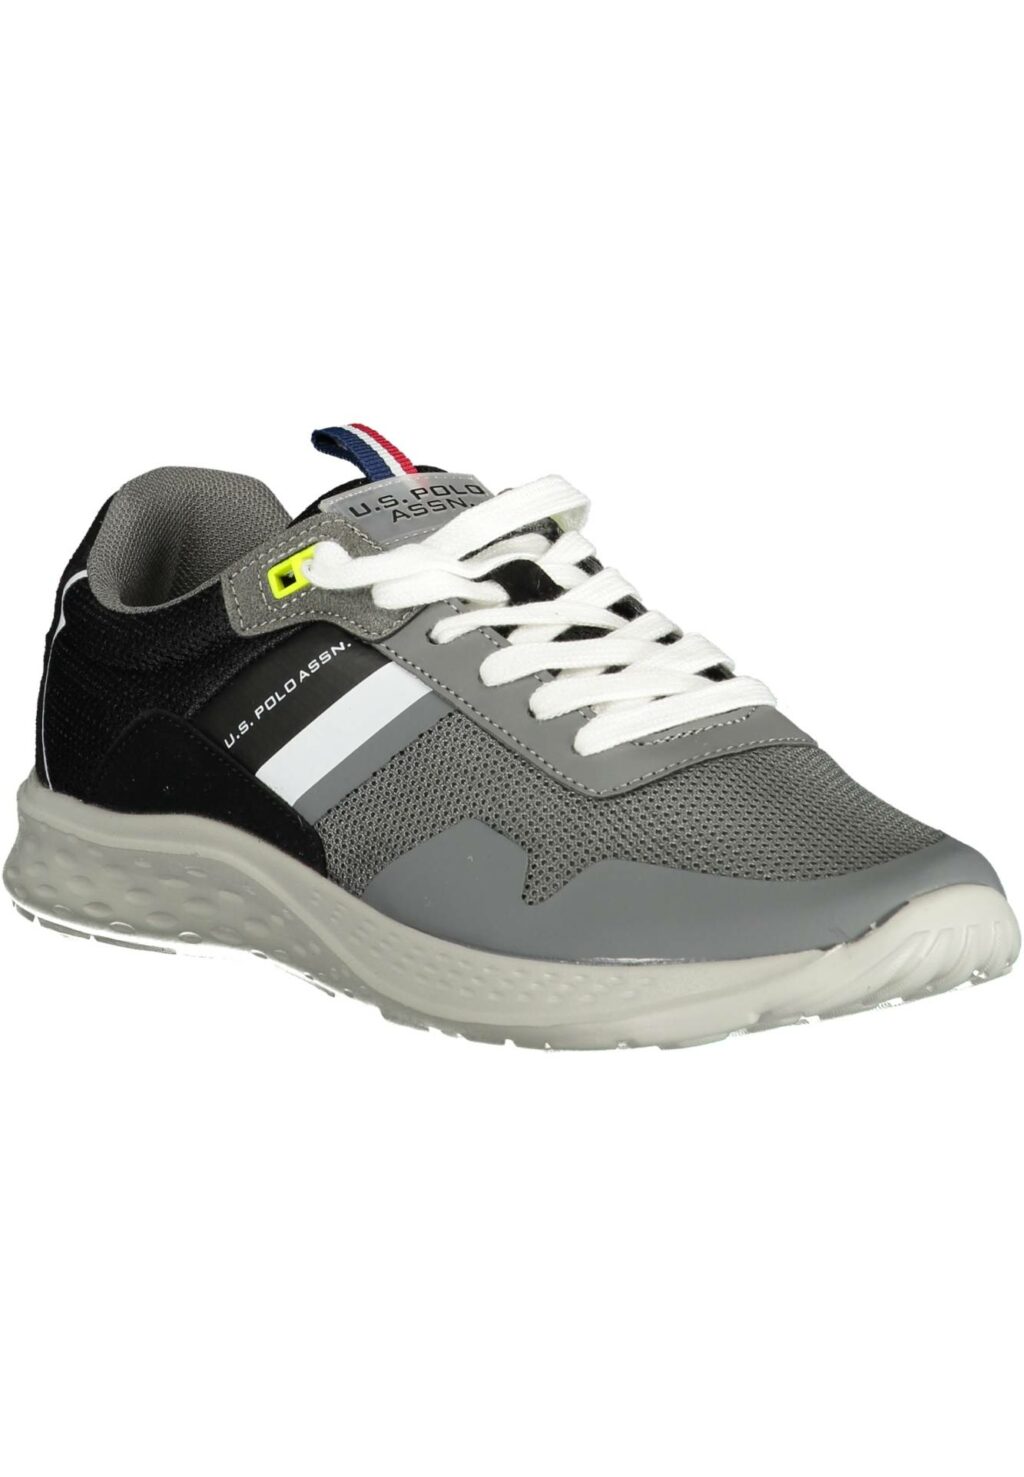 US POLO ASSN. GRAY MEN'S SPORTS SHOES GARY001M2MH1_GRIGIO_BLK-GRY03